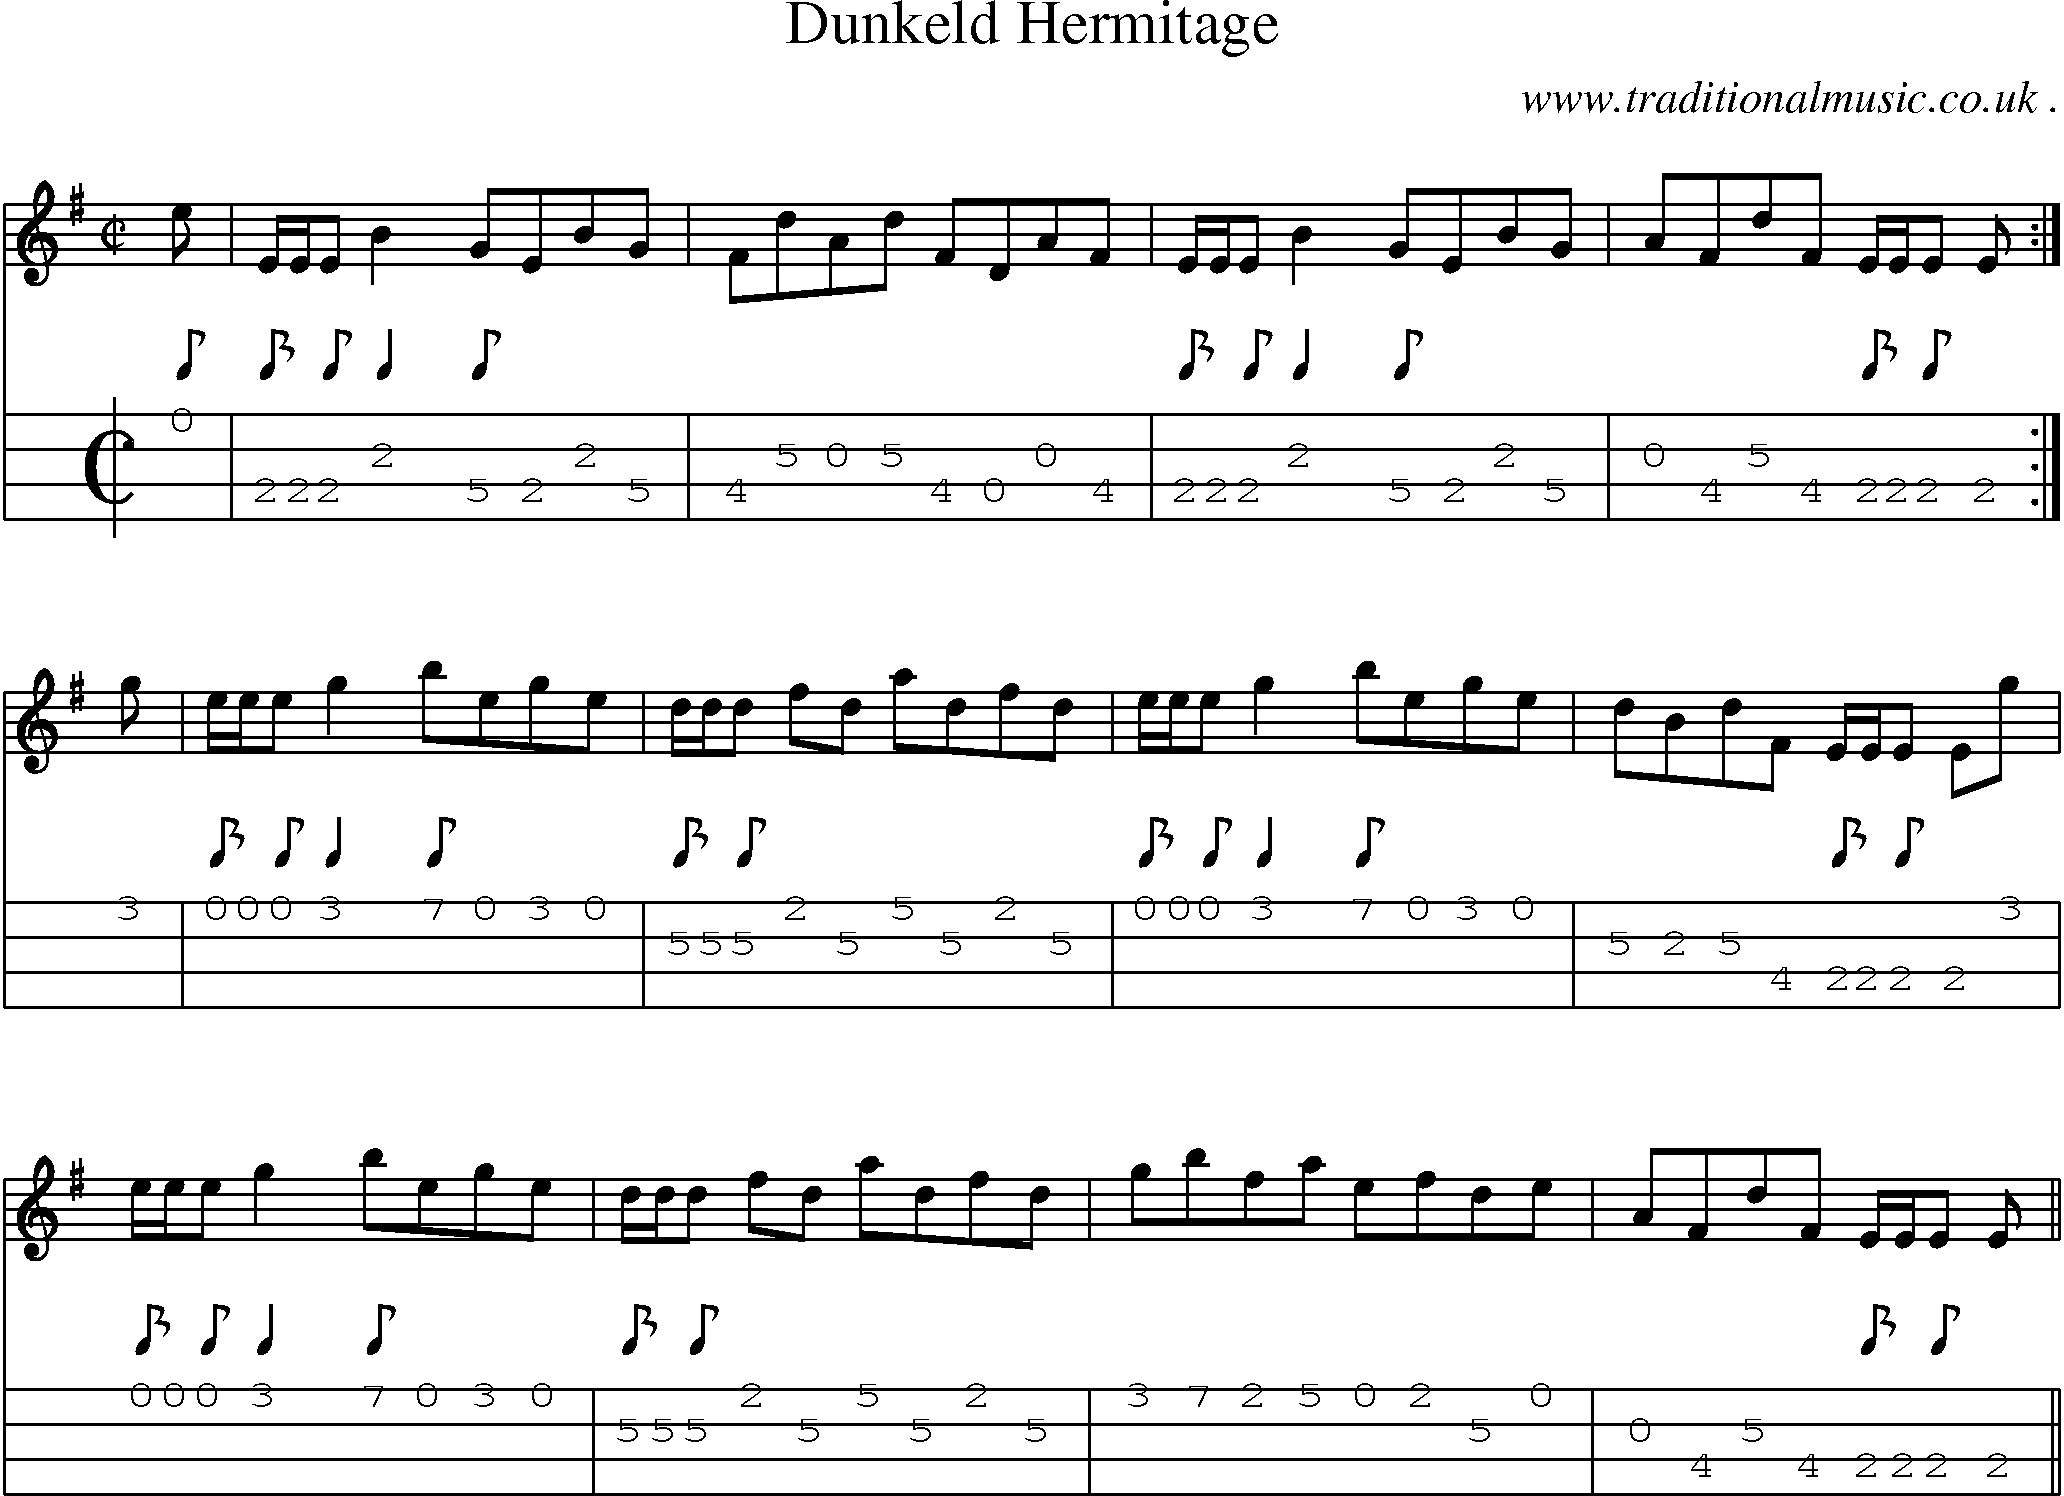 Sheet-music  score, Chords and Mandolin Tabs for Dunkeld Hermitage